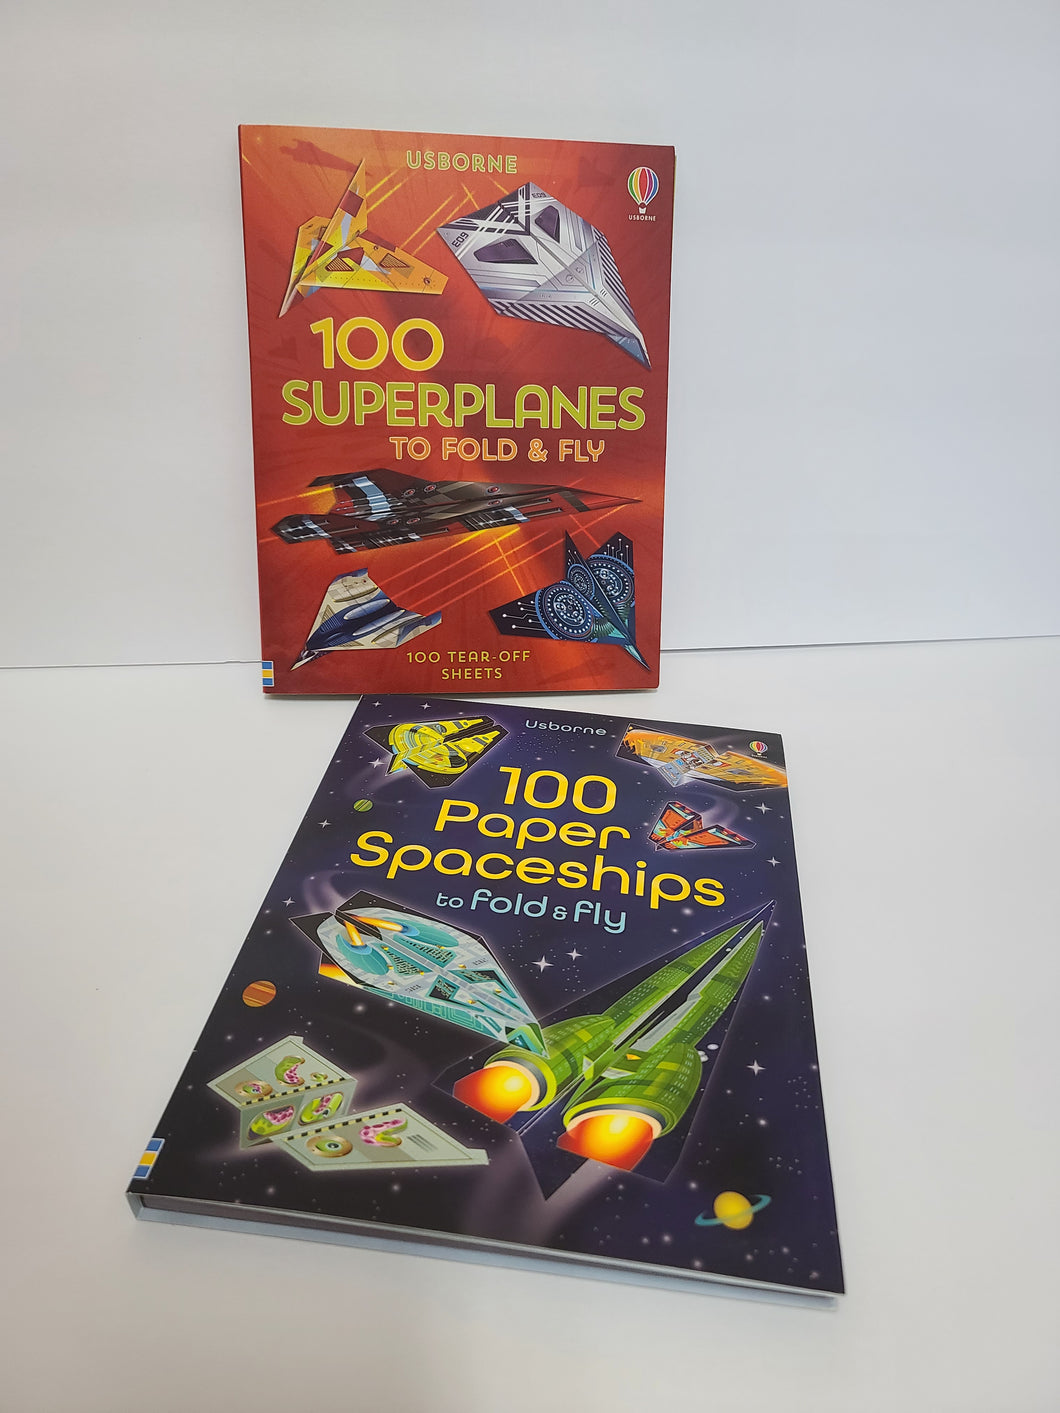 Paper Planes Books Set of 2 - Superplanes & Spaceships